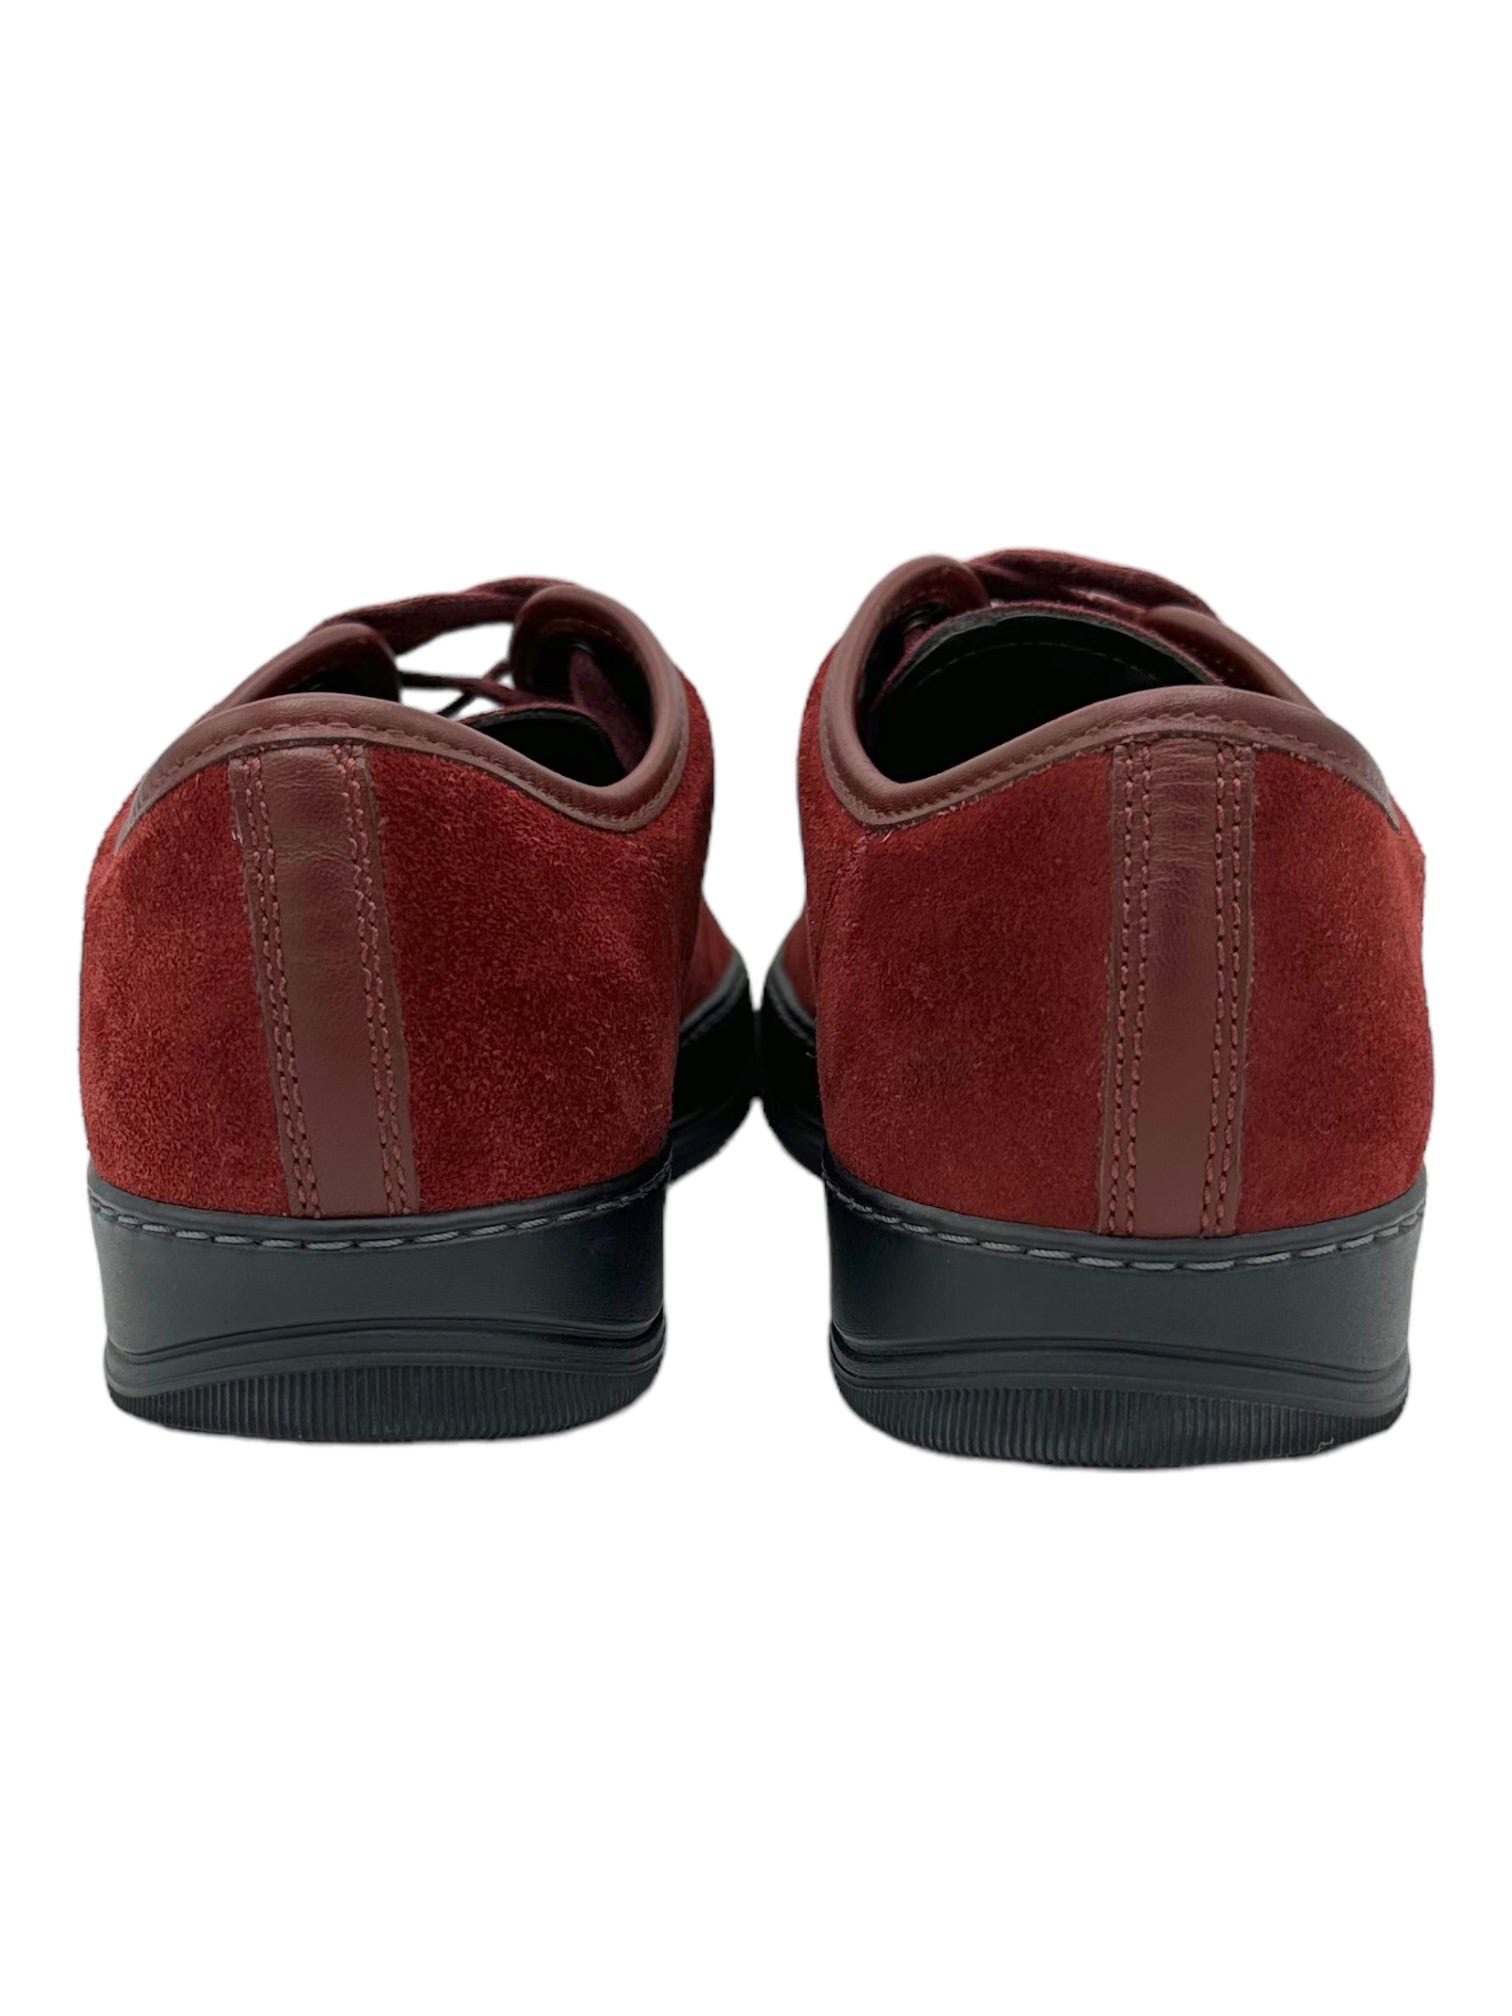 Lanvin Paris Maroon Suede & Black Sole DBB1 Casual Sneakers - Genuine Design Luxury Consignment. New & Pre-Owned Clothing, Shoes, & Accessories. Calgary, Canada